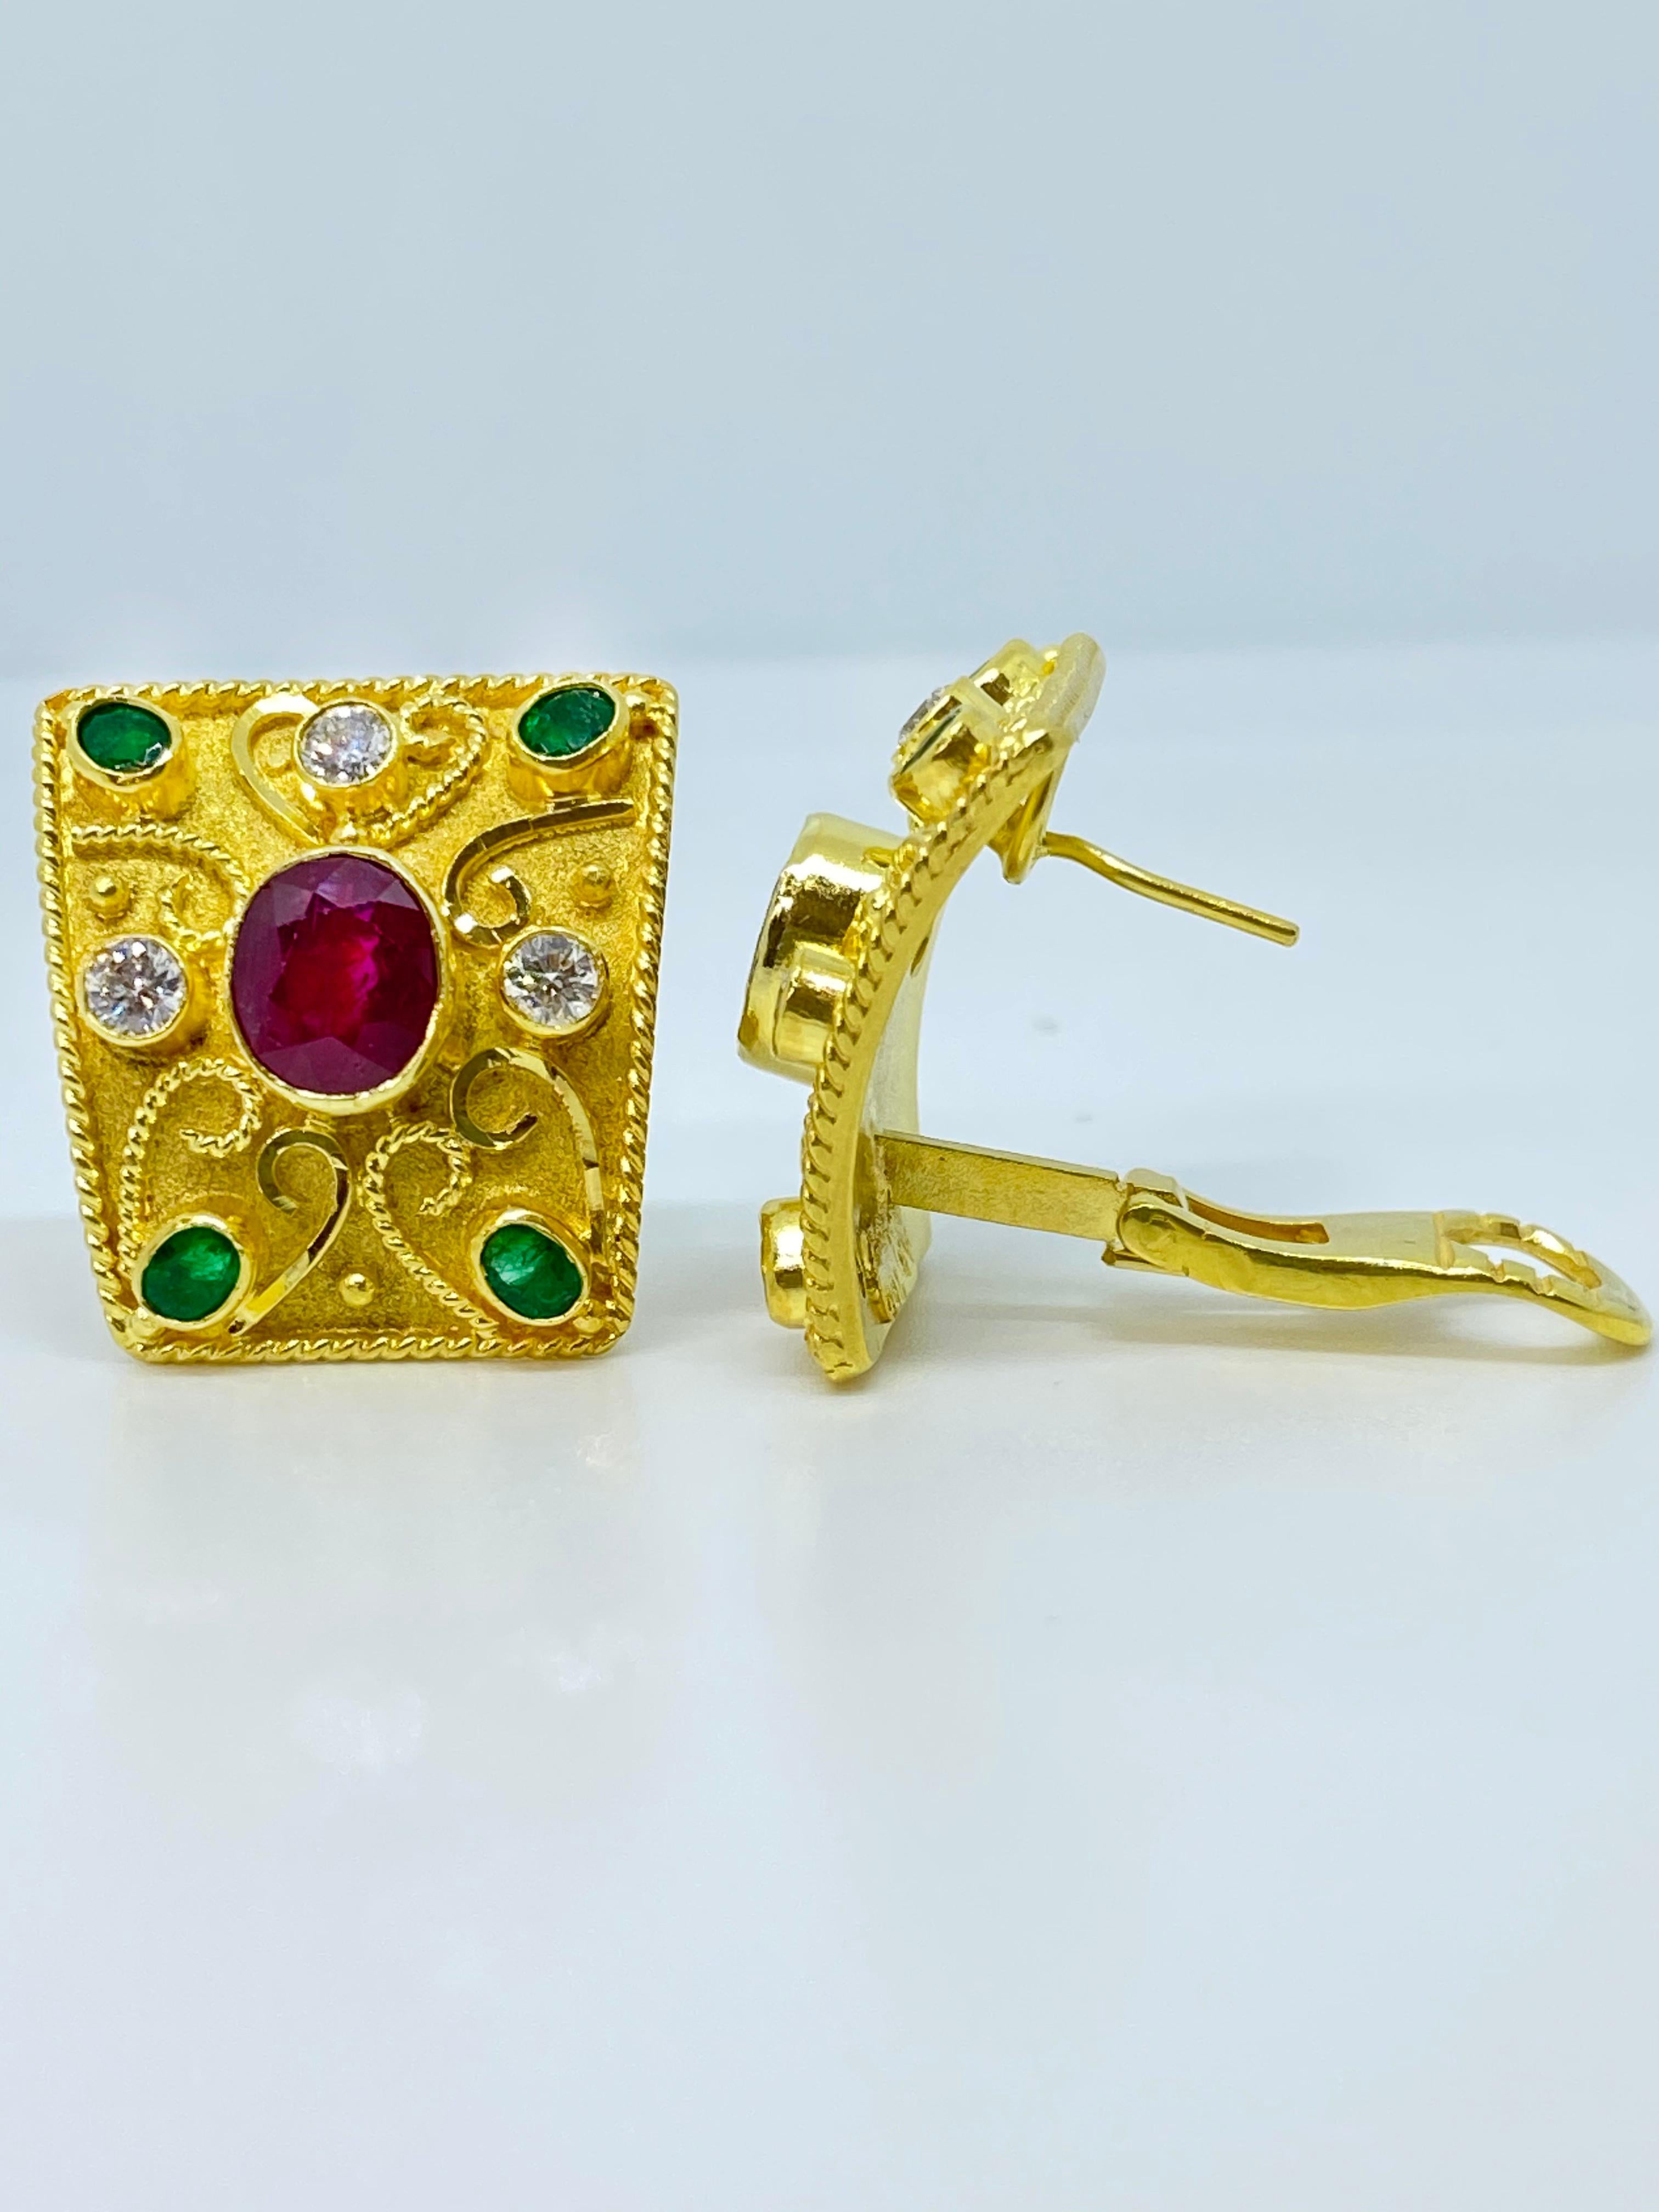 These S.Georgios designer earrings are hand made from 18 Karat Yellow Gold and decorated with Byzantine-era style granulation workmanship done piece by piece microscopically. . These beautiful curved earrings feature 2 Oval cut Rubies surrounded by